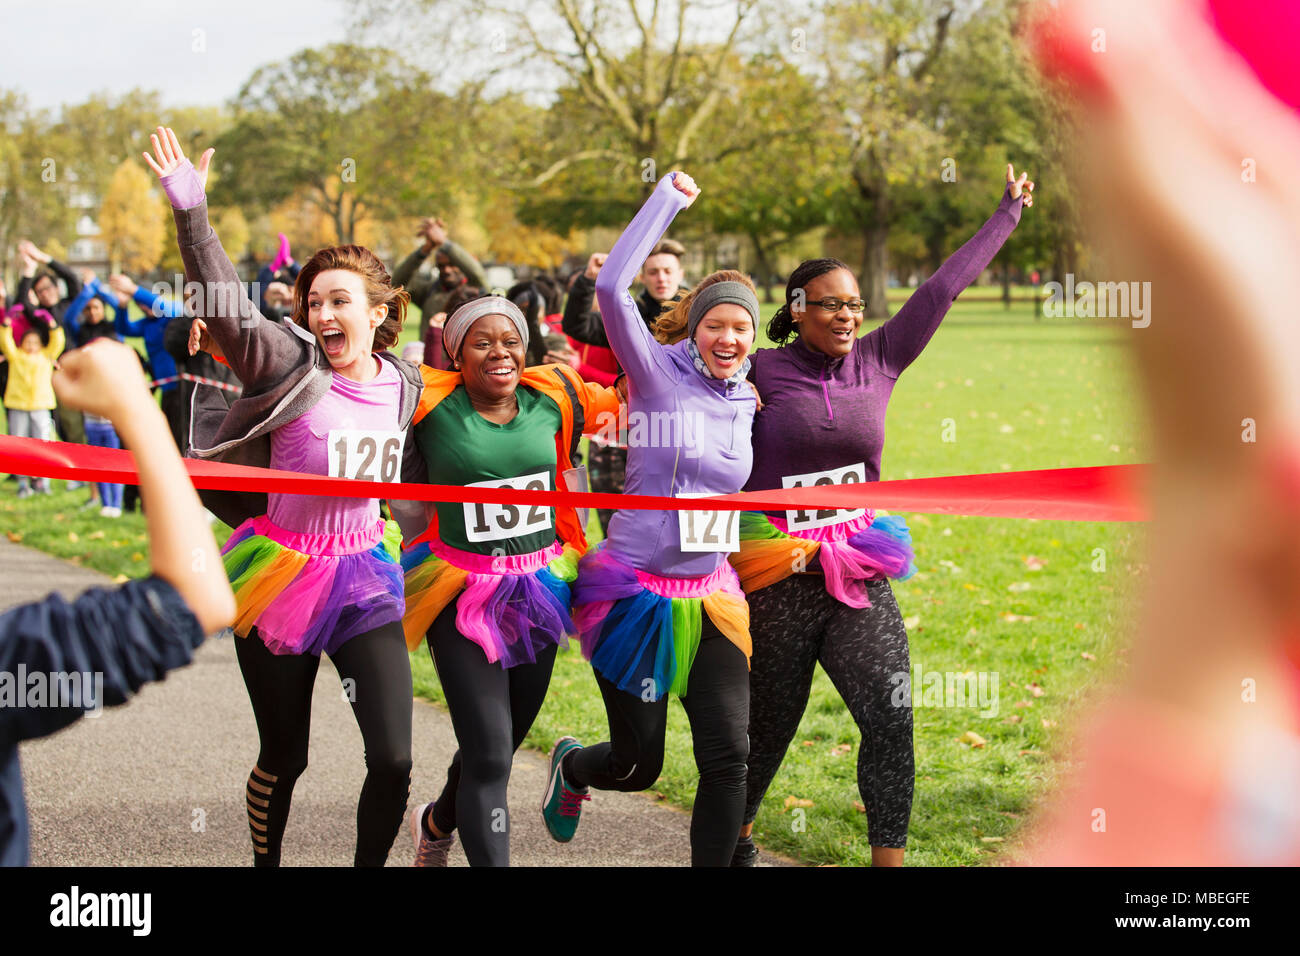 Enthusiastic female runners in tutus crossing charity run finish line in park, celebrating Stock Photo